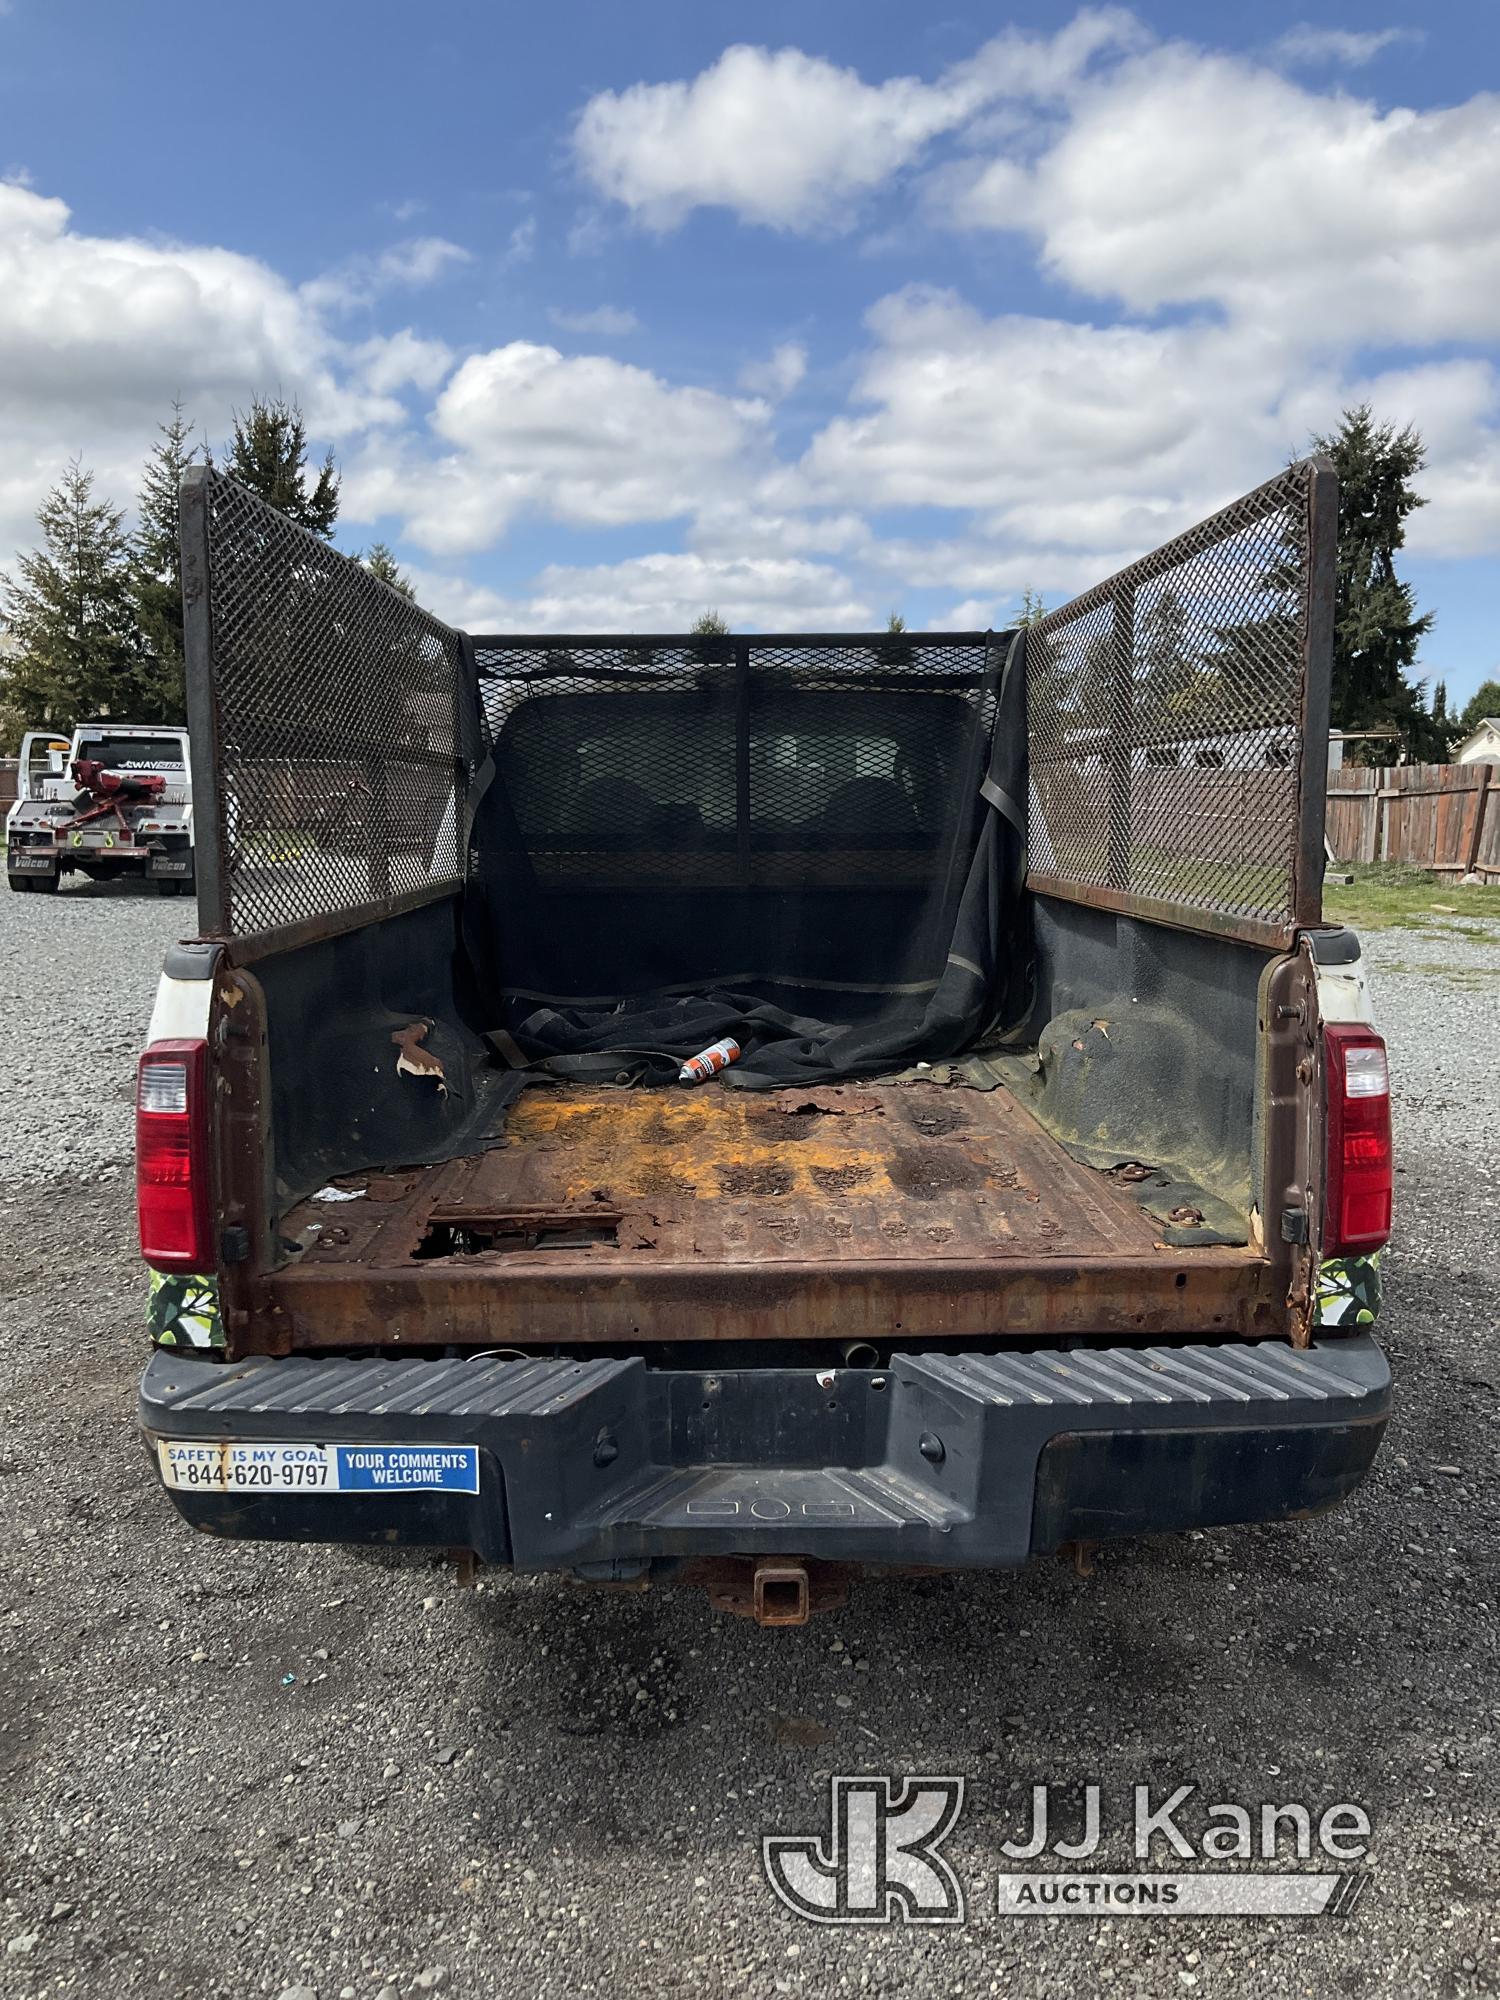 (Tacoma, WA) 2010 Ford F350 Crew-Cab Pickup Truck Not Running, Condition Unknown) (Battery Is Missin